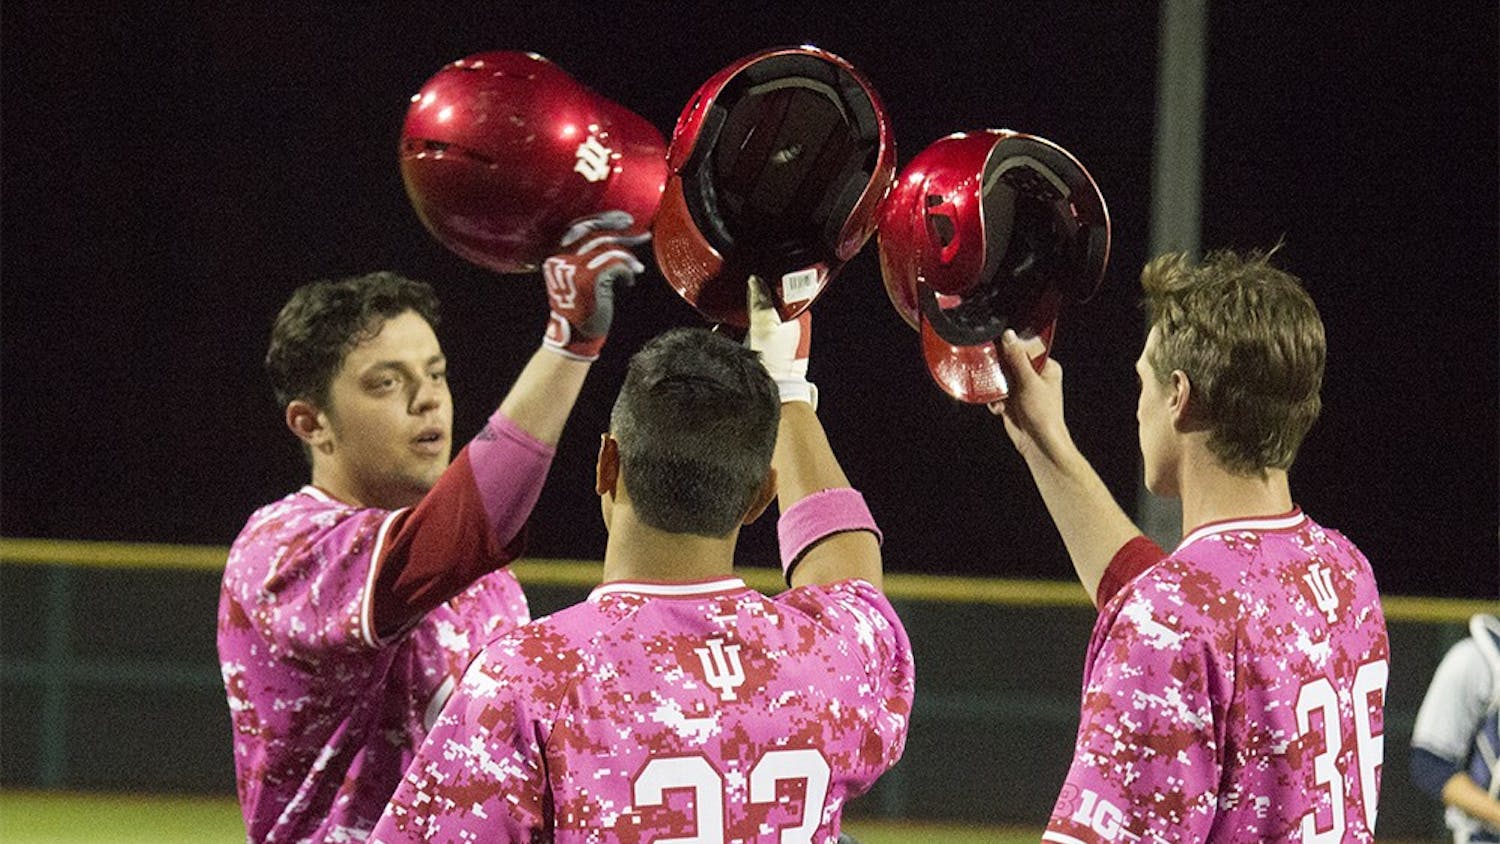 Junior Austin Cangelosi, left, taps helmets with his teammates after scoring his second home run of the night against Butler on Wednesday at Bart Kaufman field. The Hoosiers beat the Bulldogs with a score of 27-1.